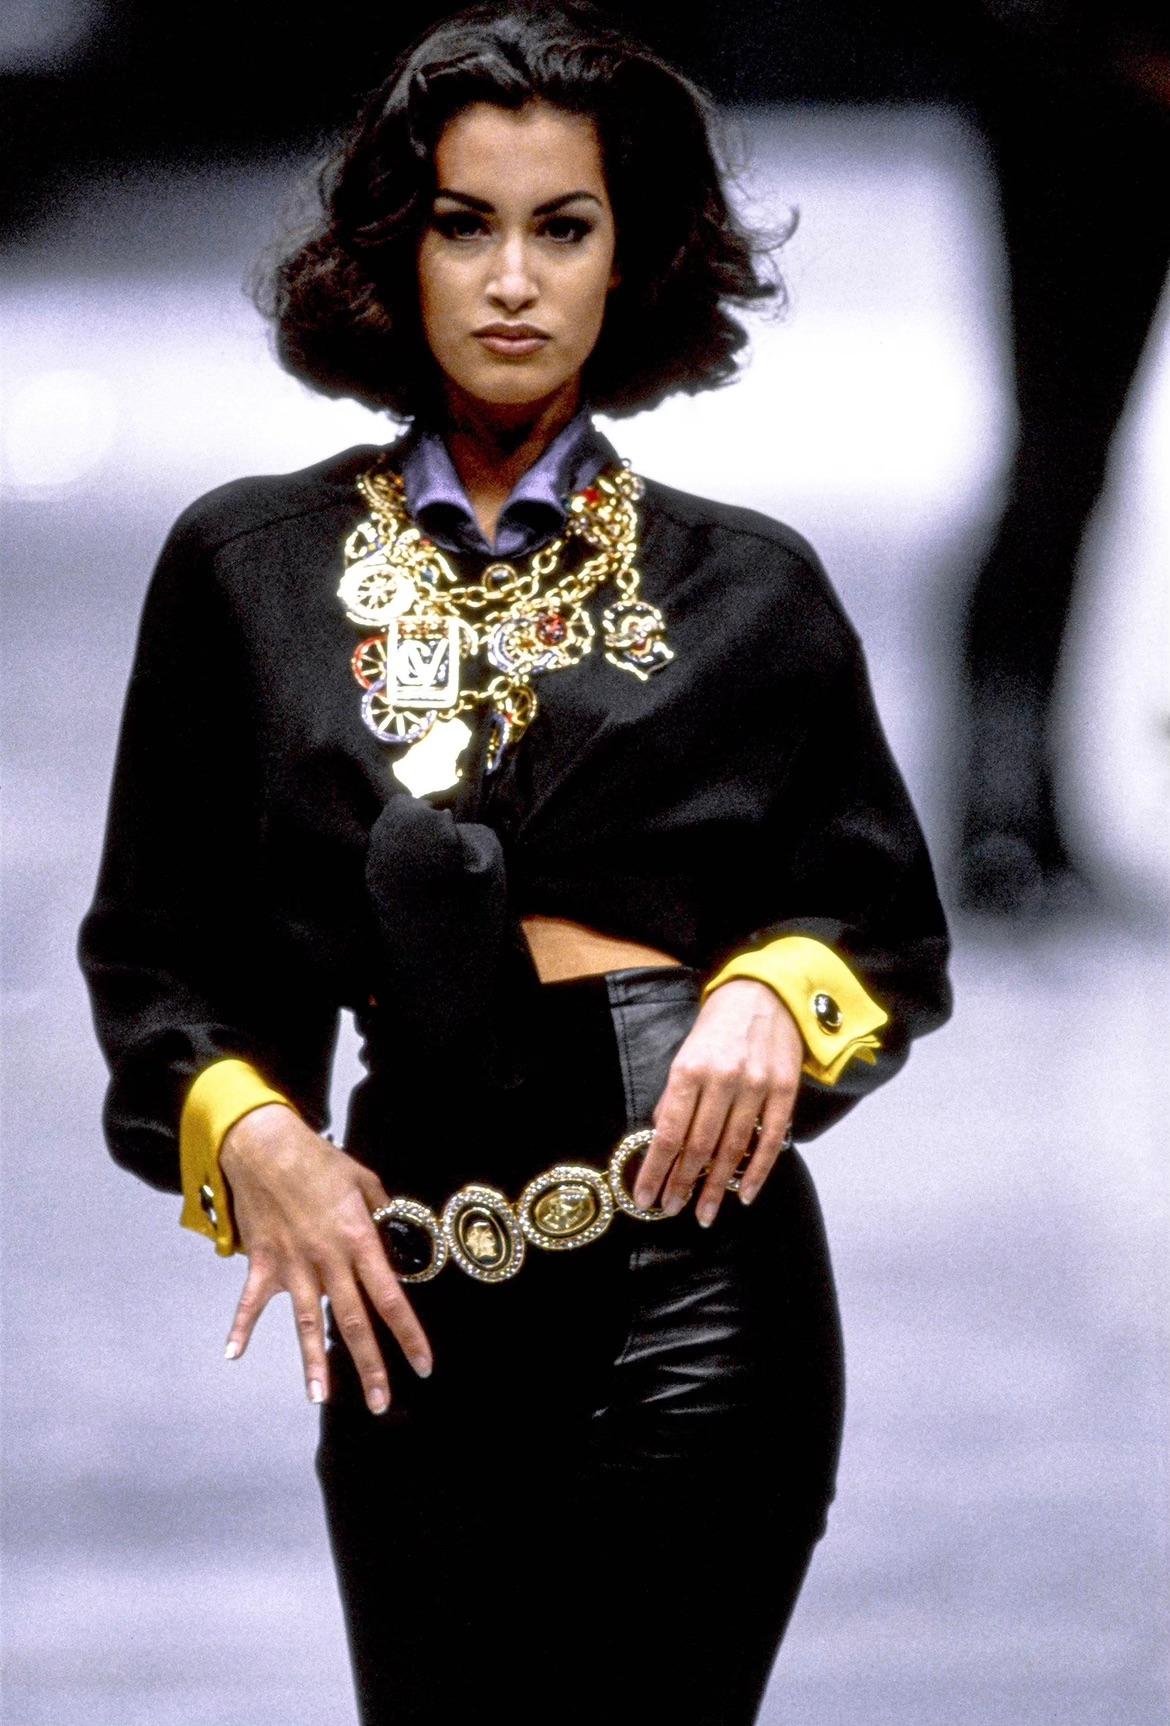 Presenting a fabulous gold-tone cameo Gianni Versace chain belt, designed by Gianni Versace. From the Fall/Winter 1991 collection, similar chain belts with cameos debuted on the season's runway. This beautiful wide link belt features black